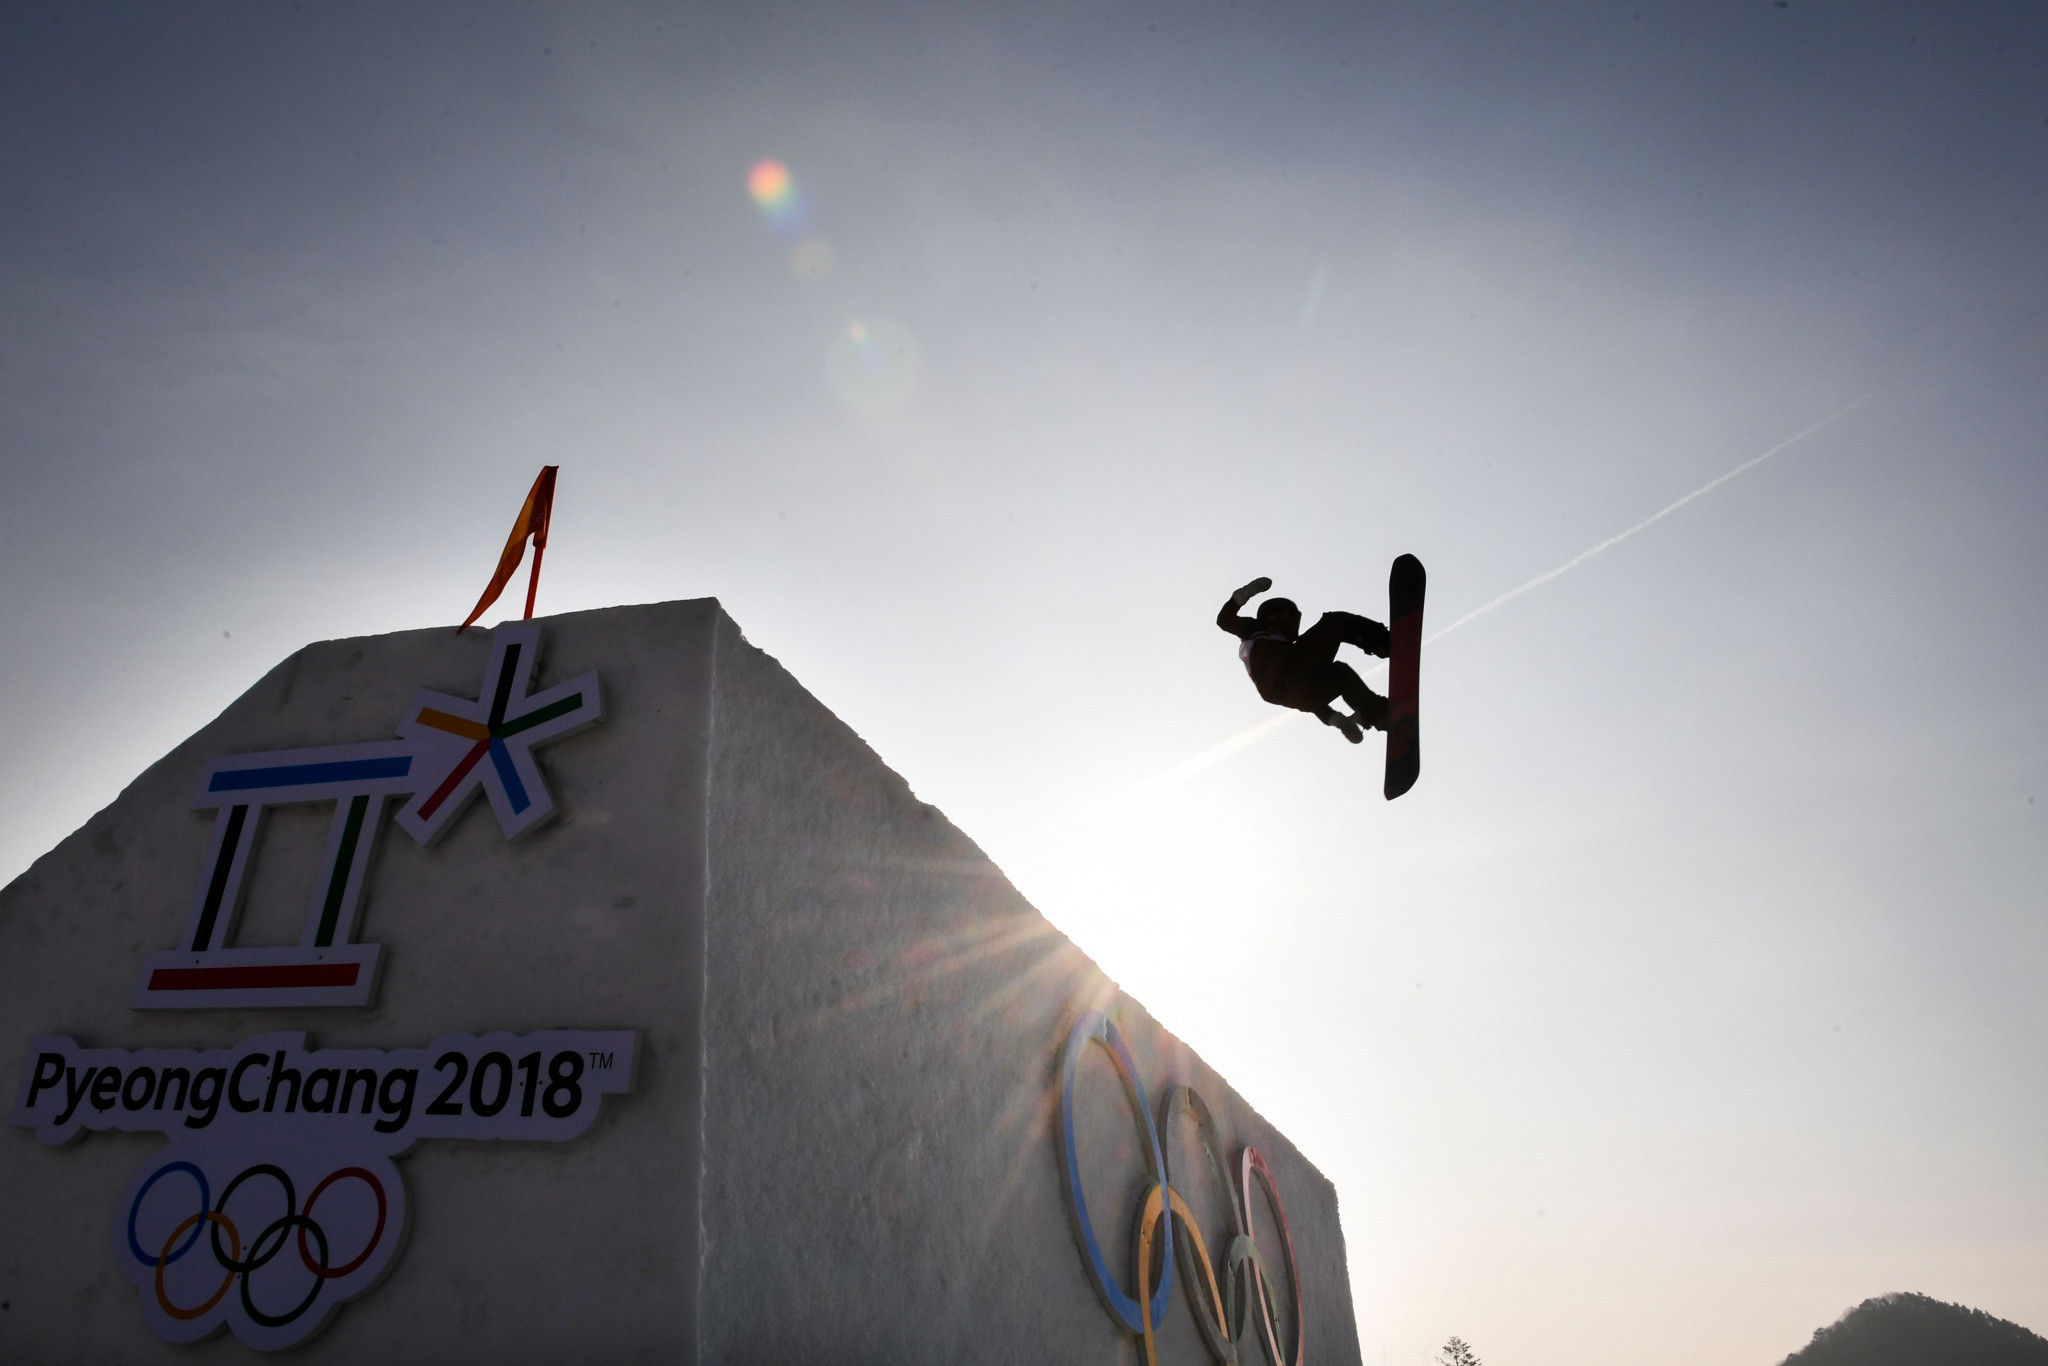 Action during warm-up for the Pyeongchang 2018 Games final of the men's snowboard big air event - which has a new venue this season in Modena ©Getty Images  